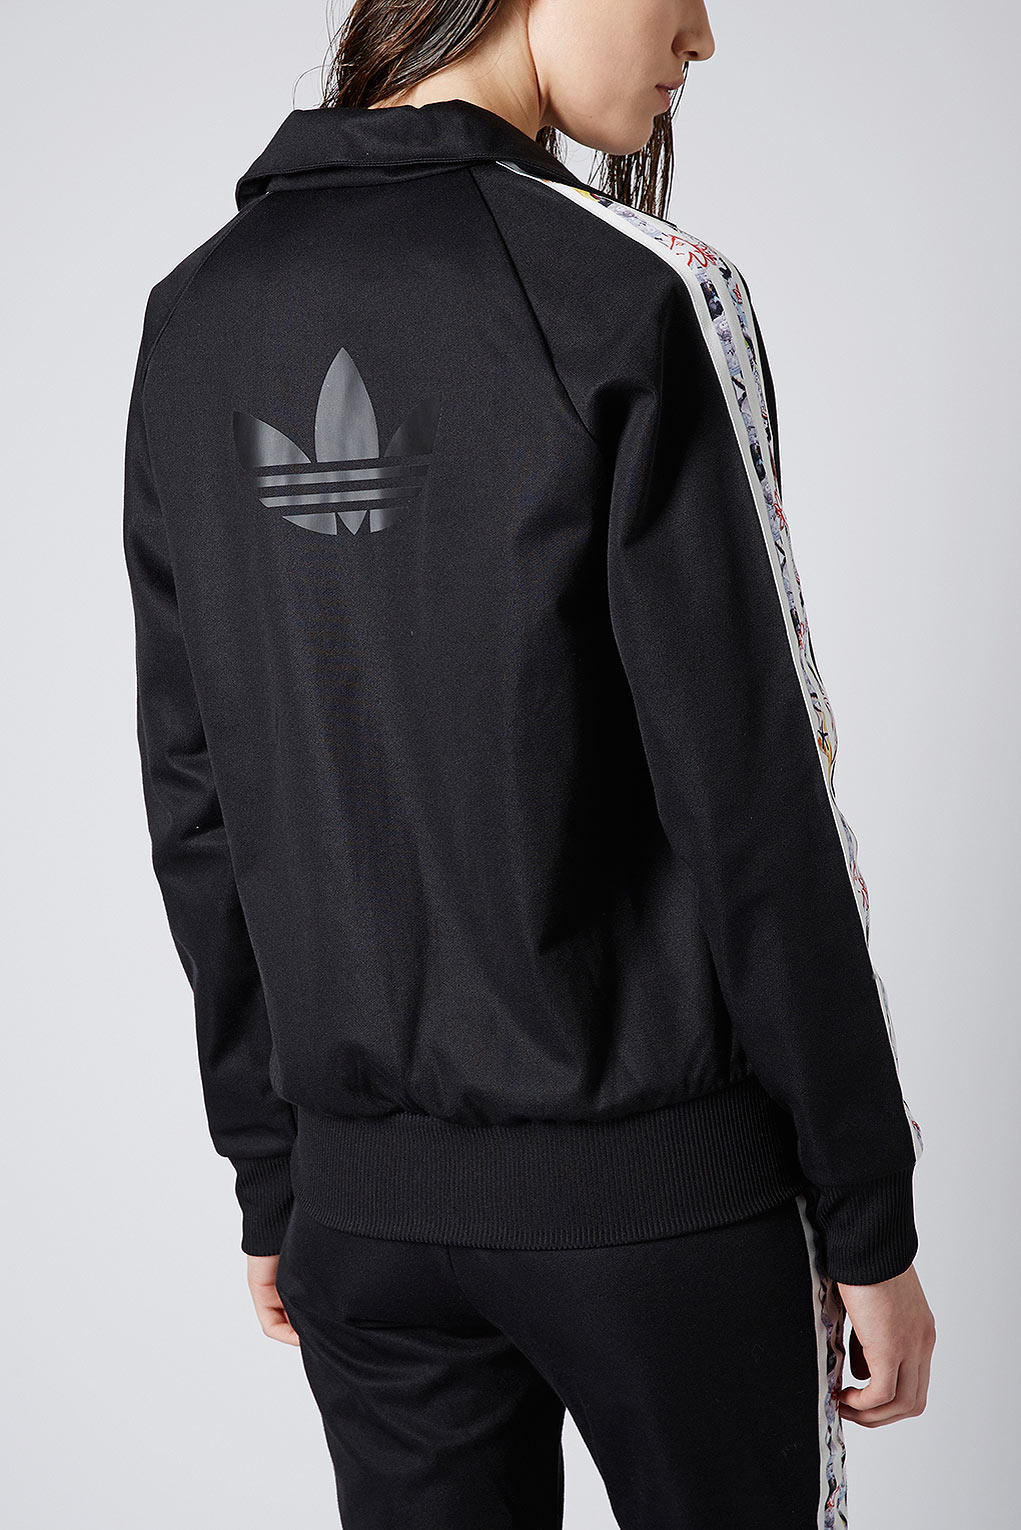 TOPSHOP Tracksuit  Top By X Adidas  Originals  in Black Lyst